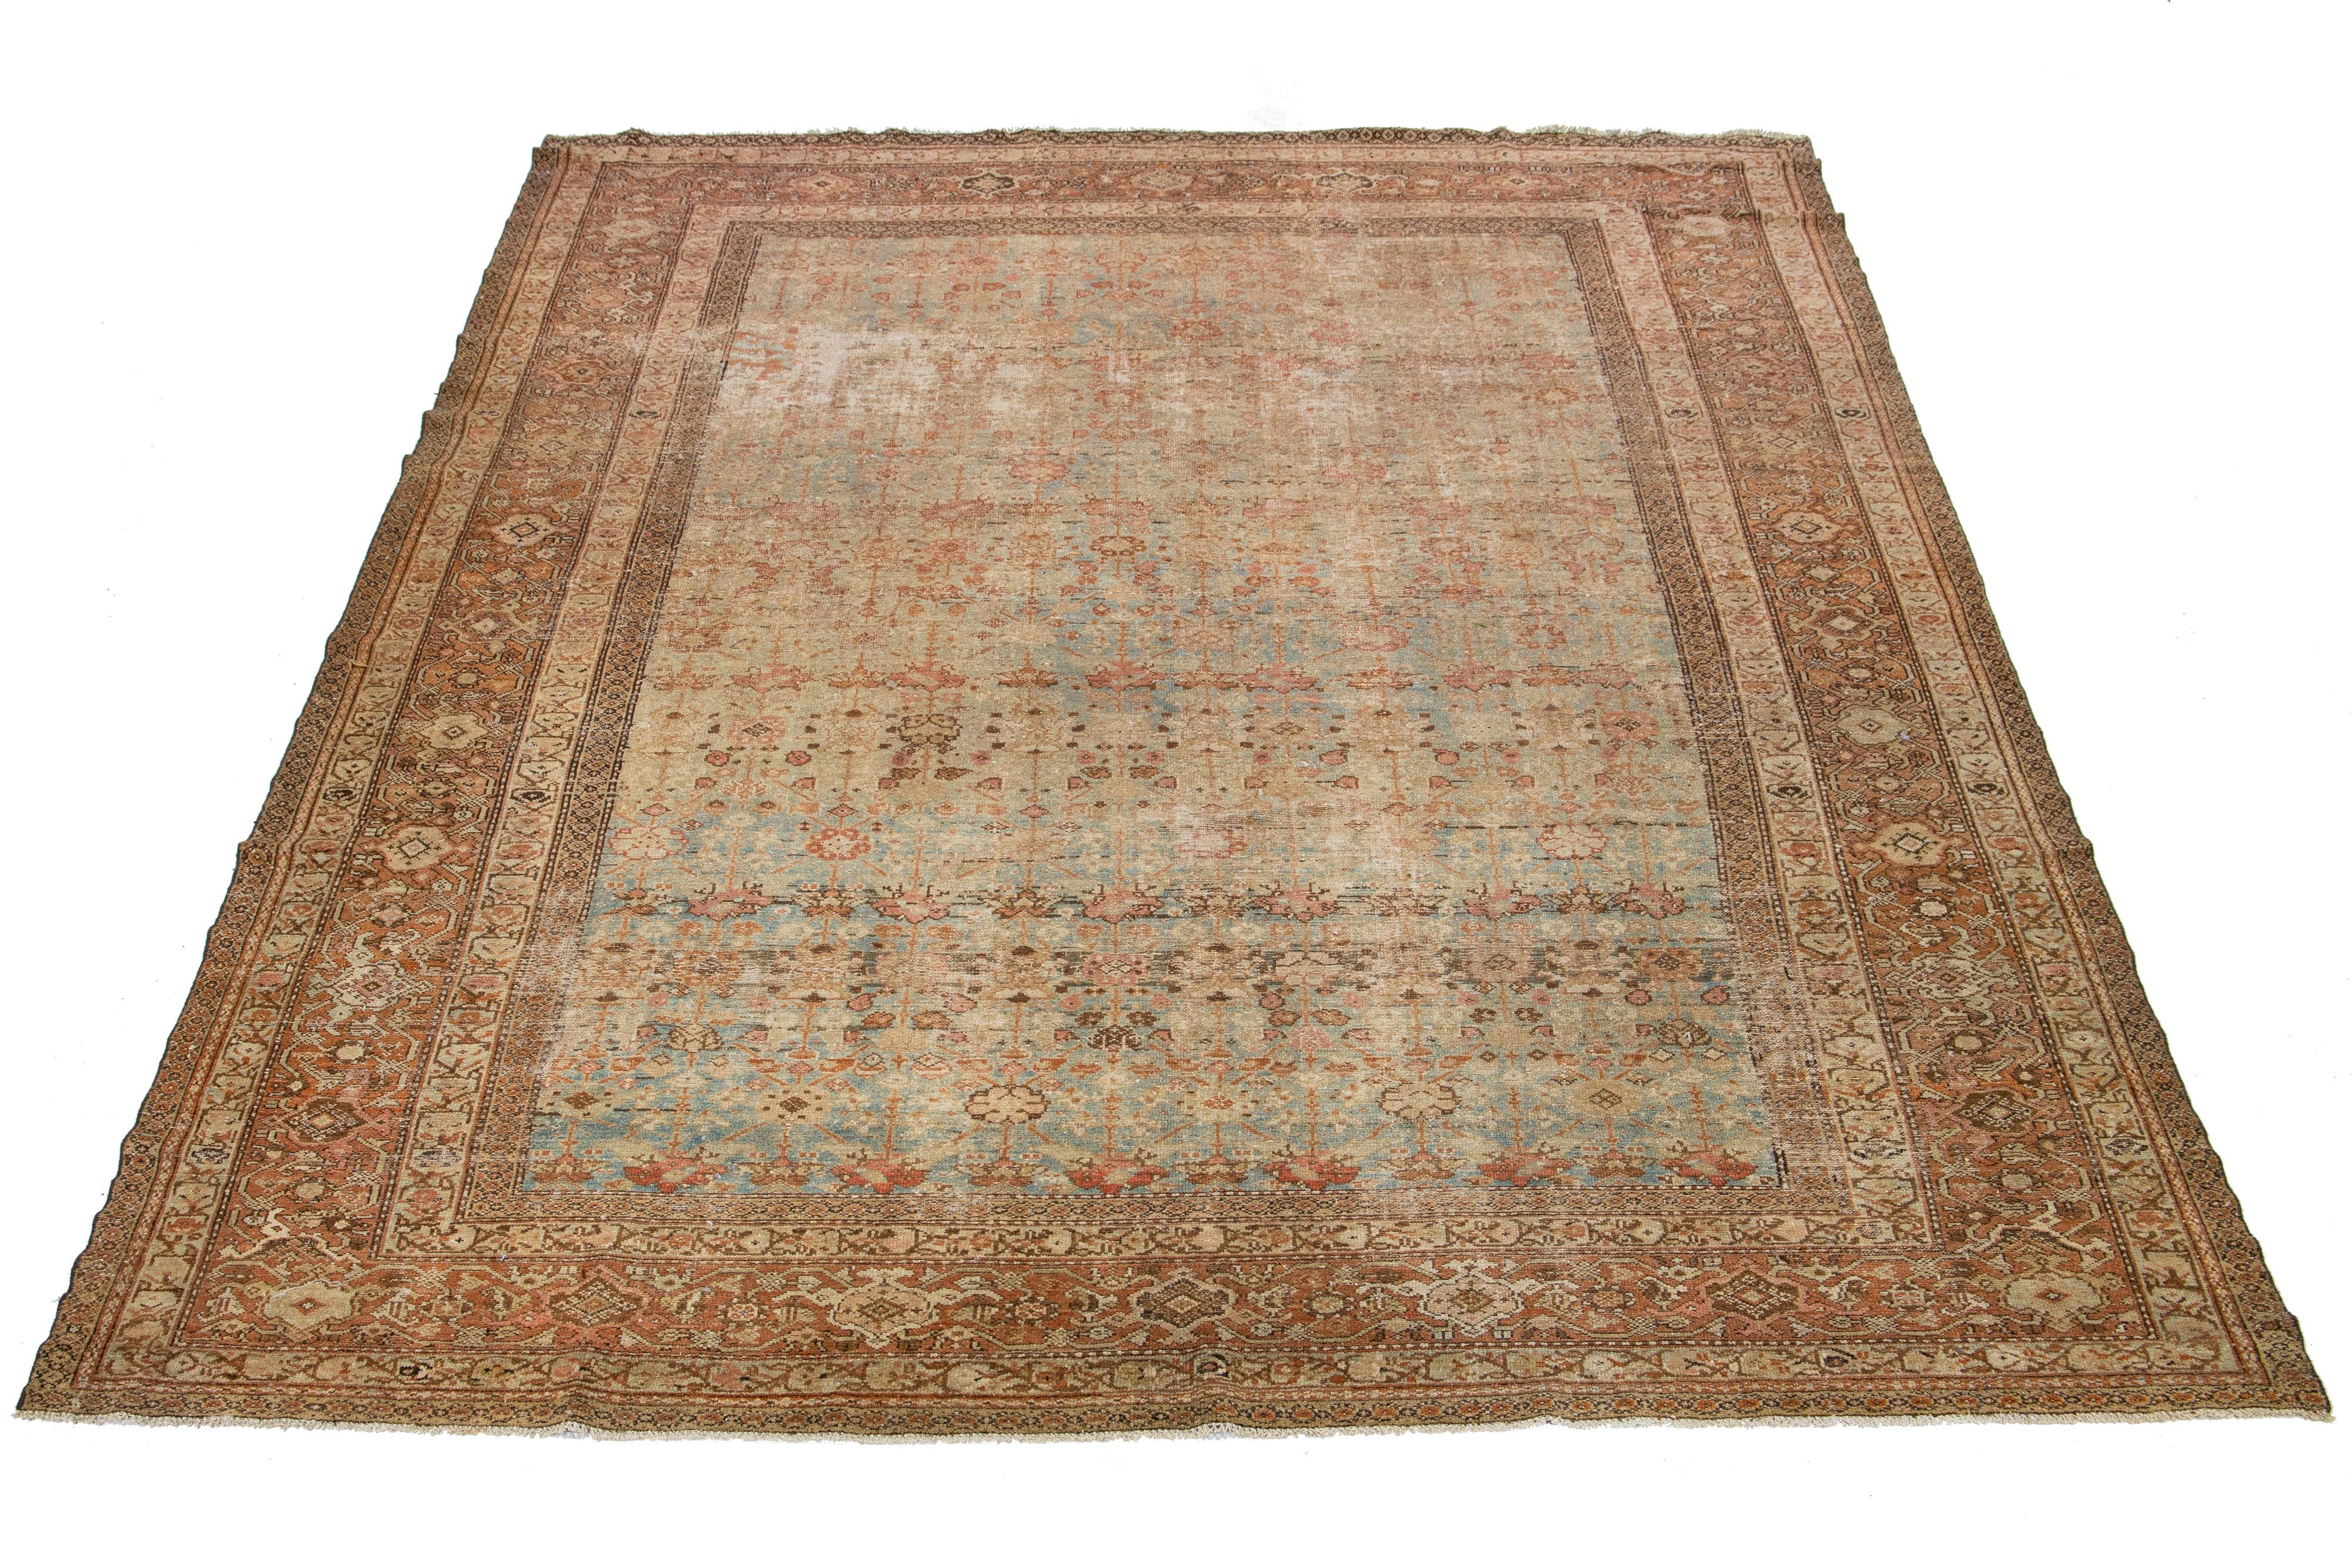 Beautiful room-size antique Malayer hand-knotted wool rug with a blue color field. This Persian rug has a gorgeous all-over floral design with terracotta and brown accents.

This rug measures 10'3